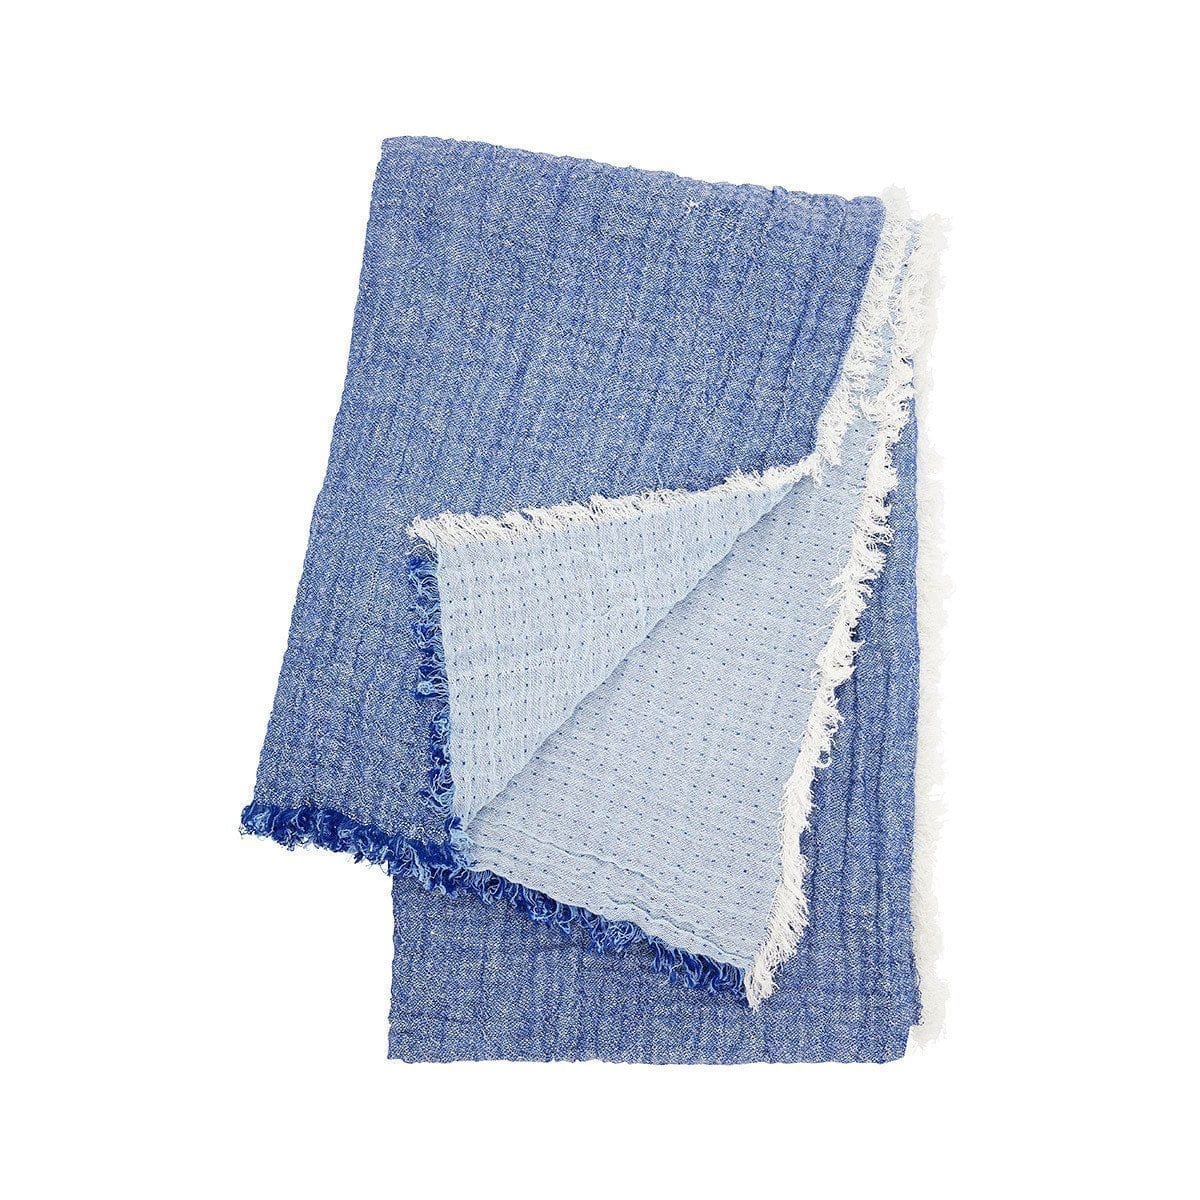 Throw Iosis Minorque Throw by Yves Delorme Denim Yves Delorme